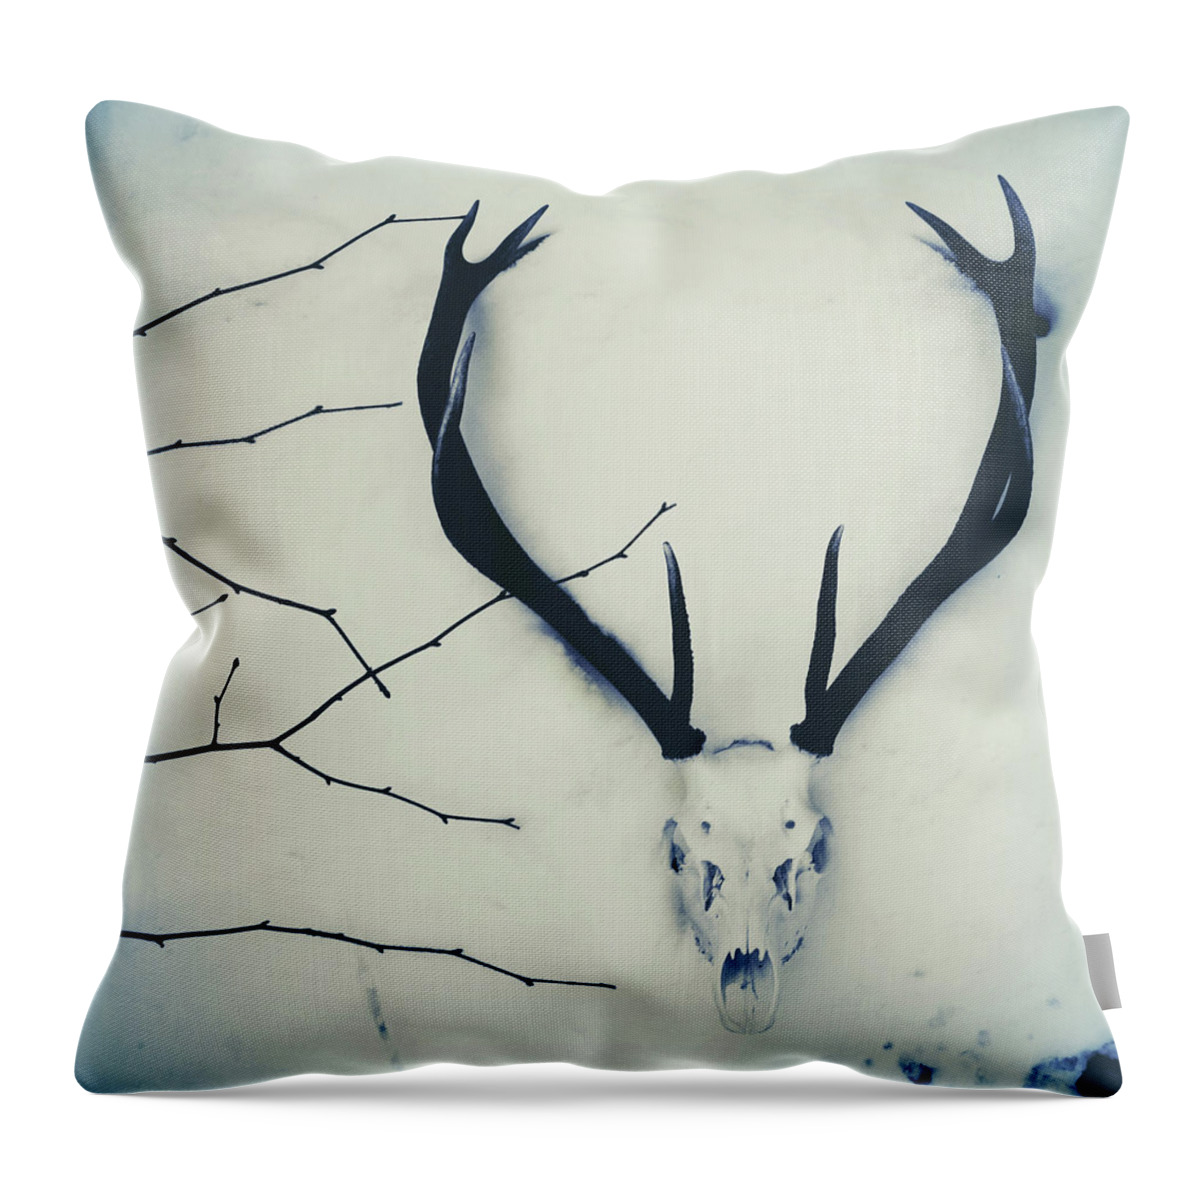 Snow Throw Pillow featuring the photograph Stagdeer Skull And Antlers In The Snow by Fiona Crawford Watson